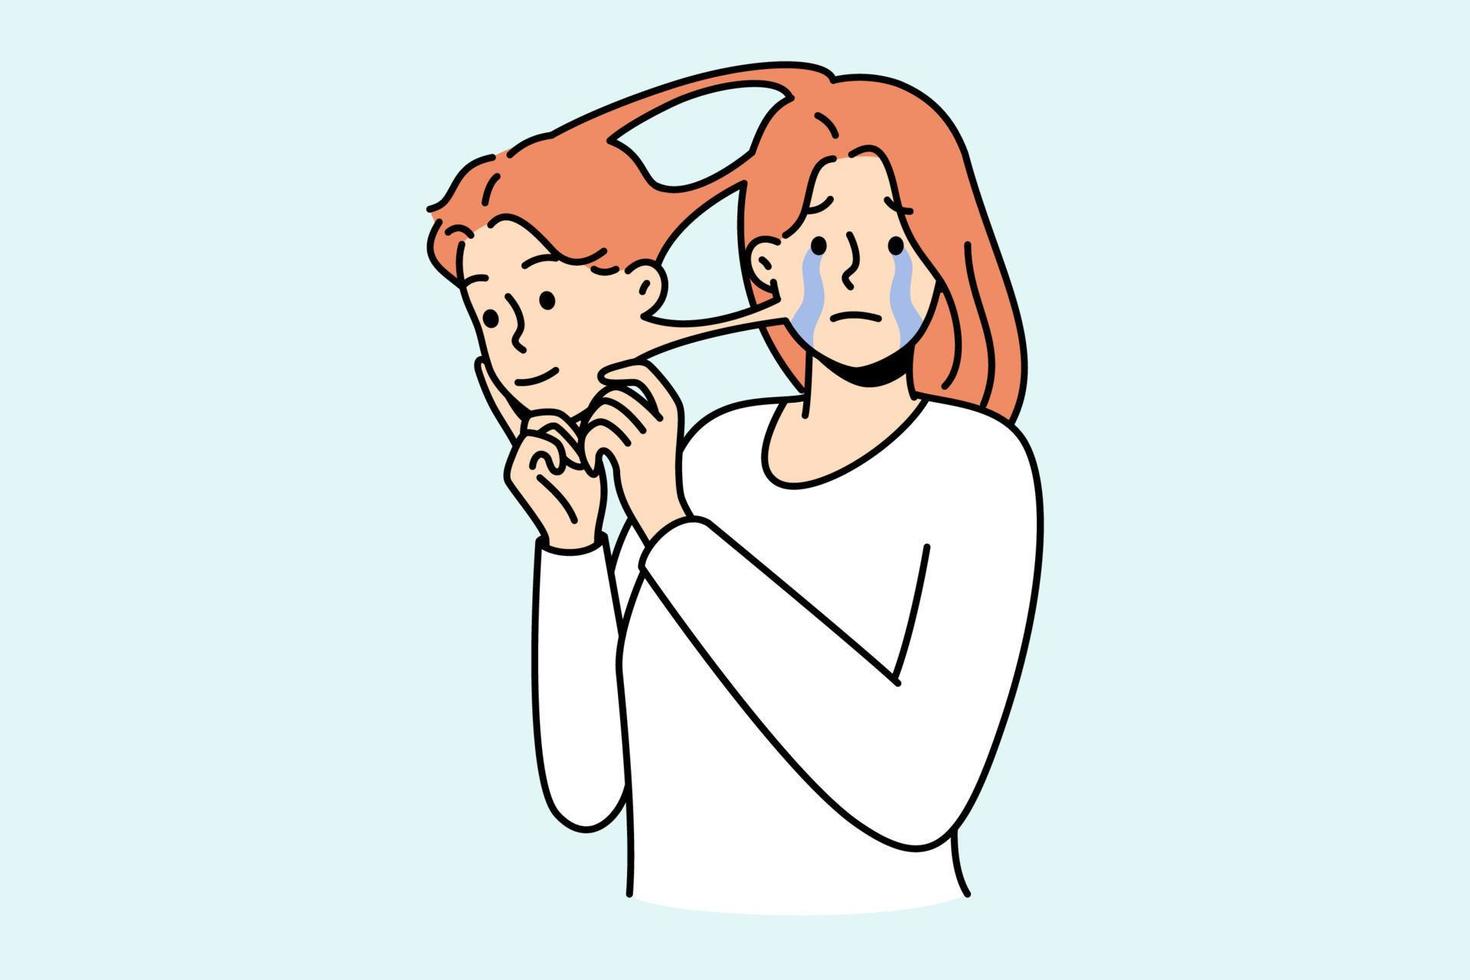 Unhappy crying woman take out mask of man suffer from trans gender identity problem. Concept of transsexual and queer people. Vector illustration.